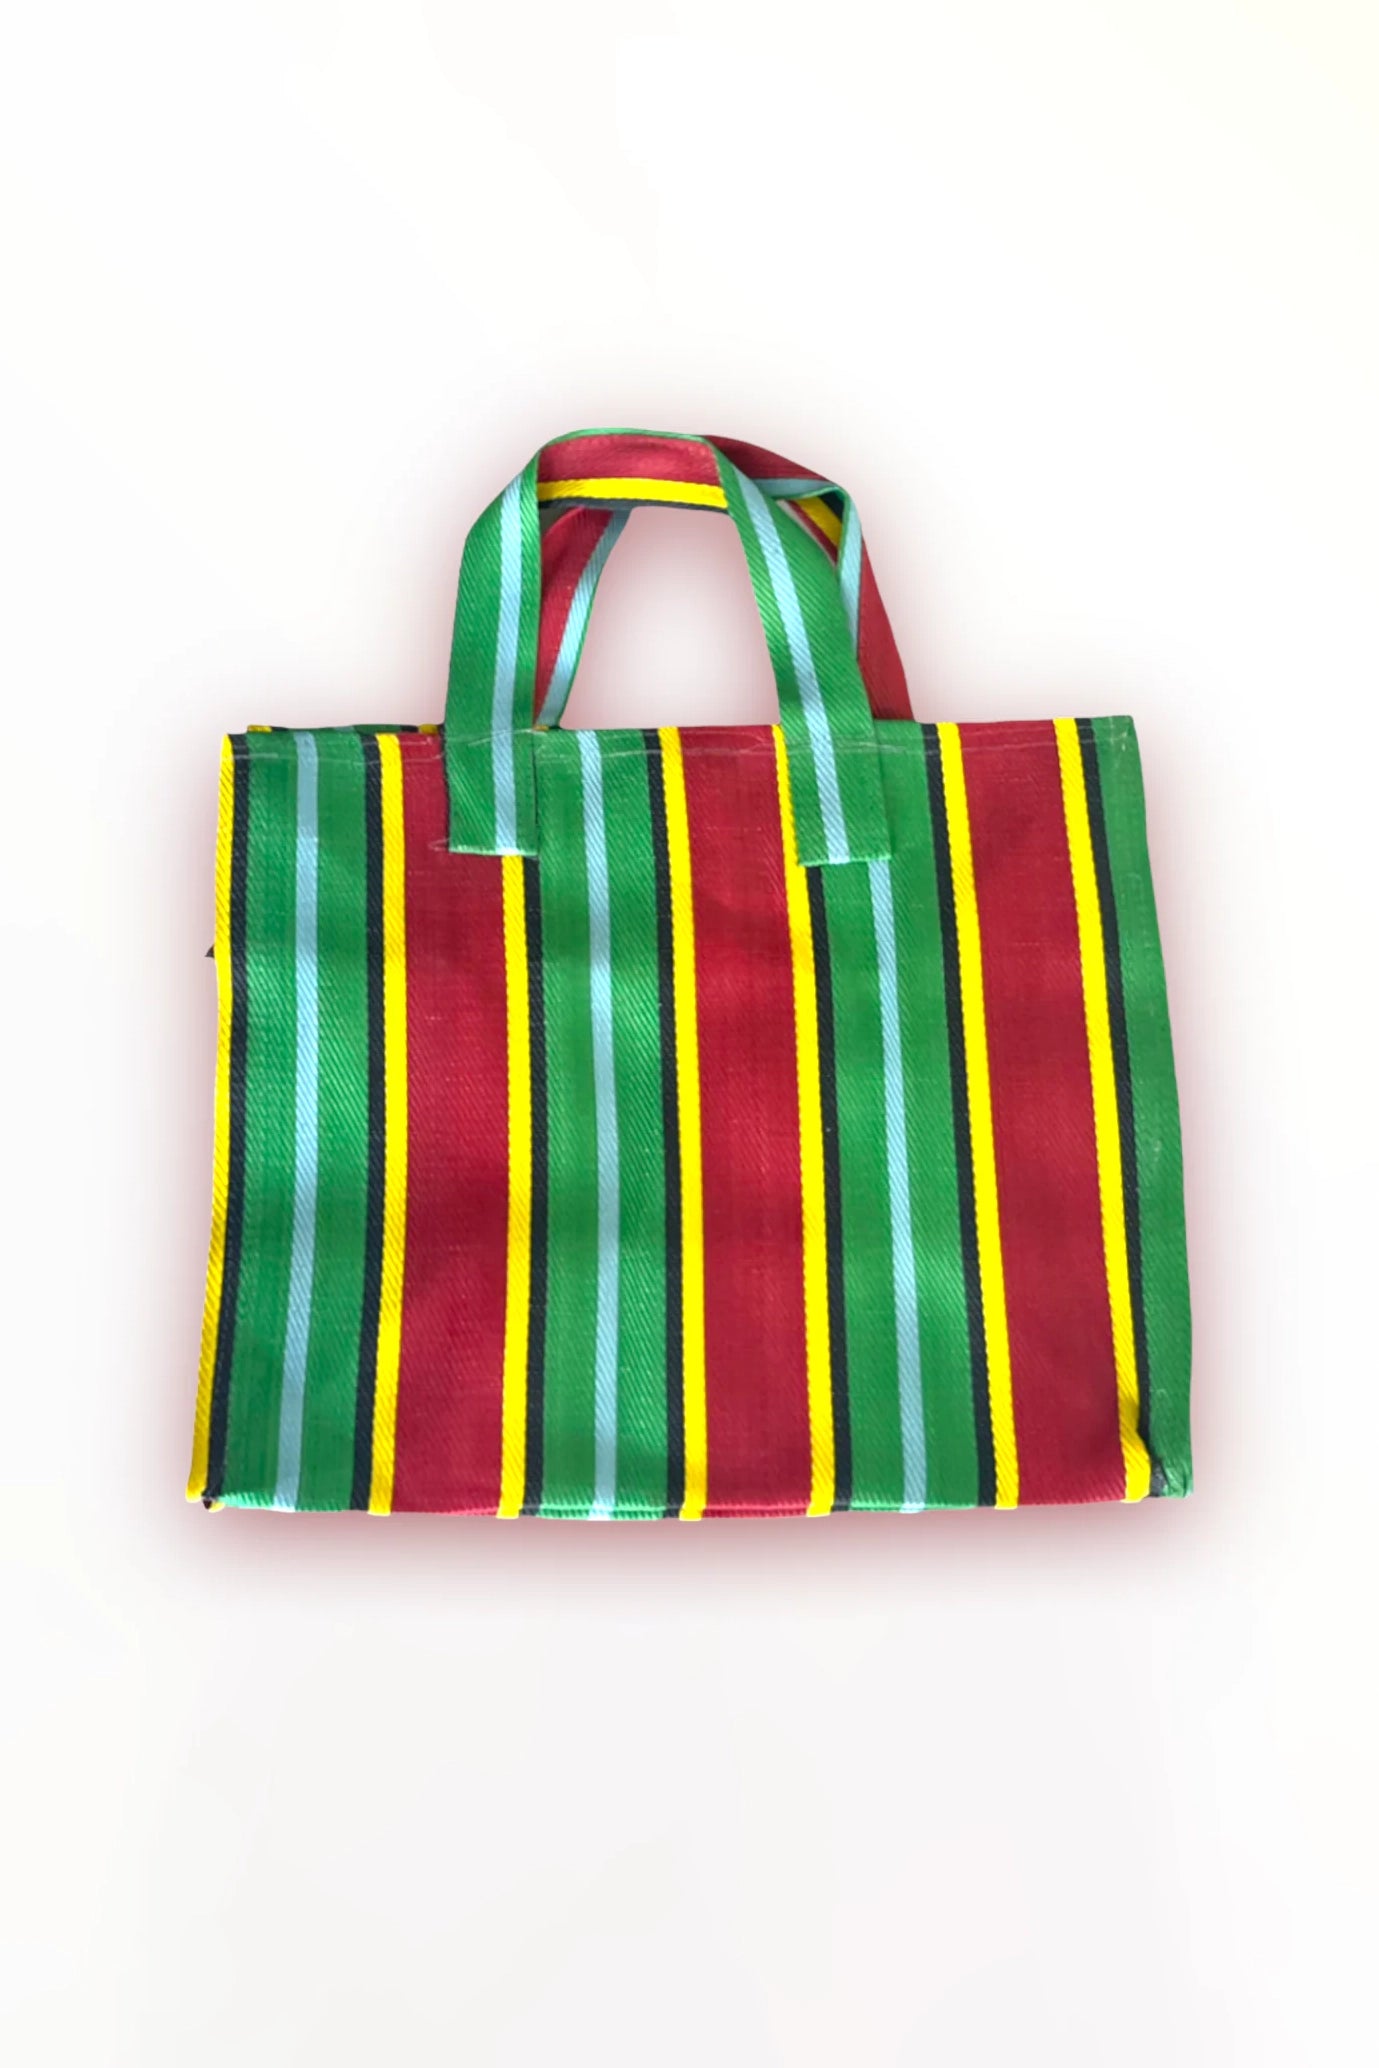 Eternity Tote Bag Red and Green